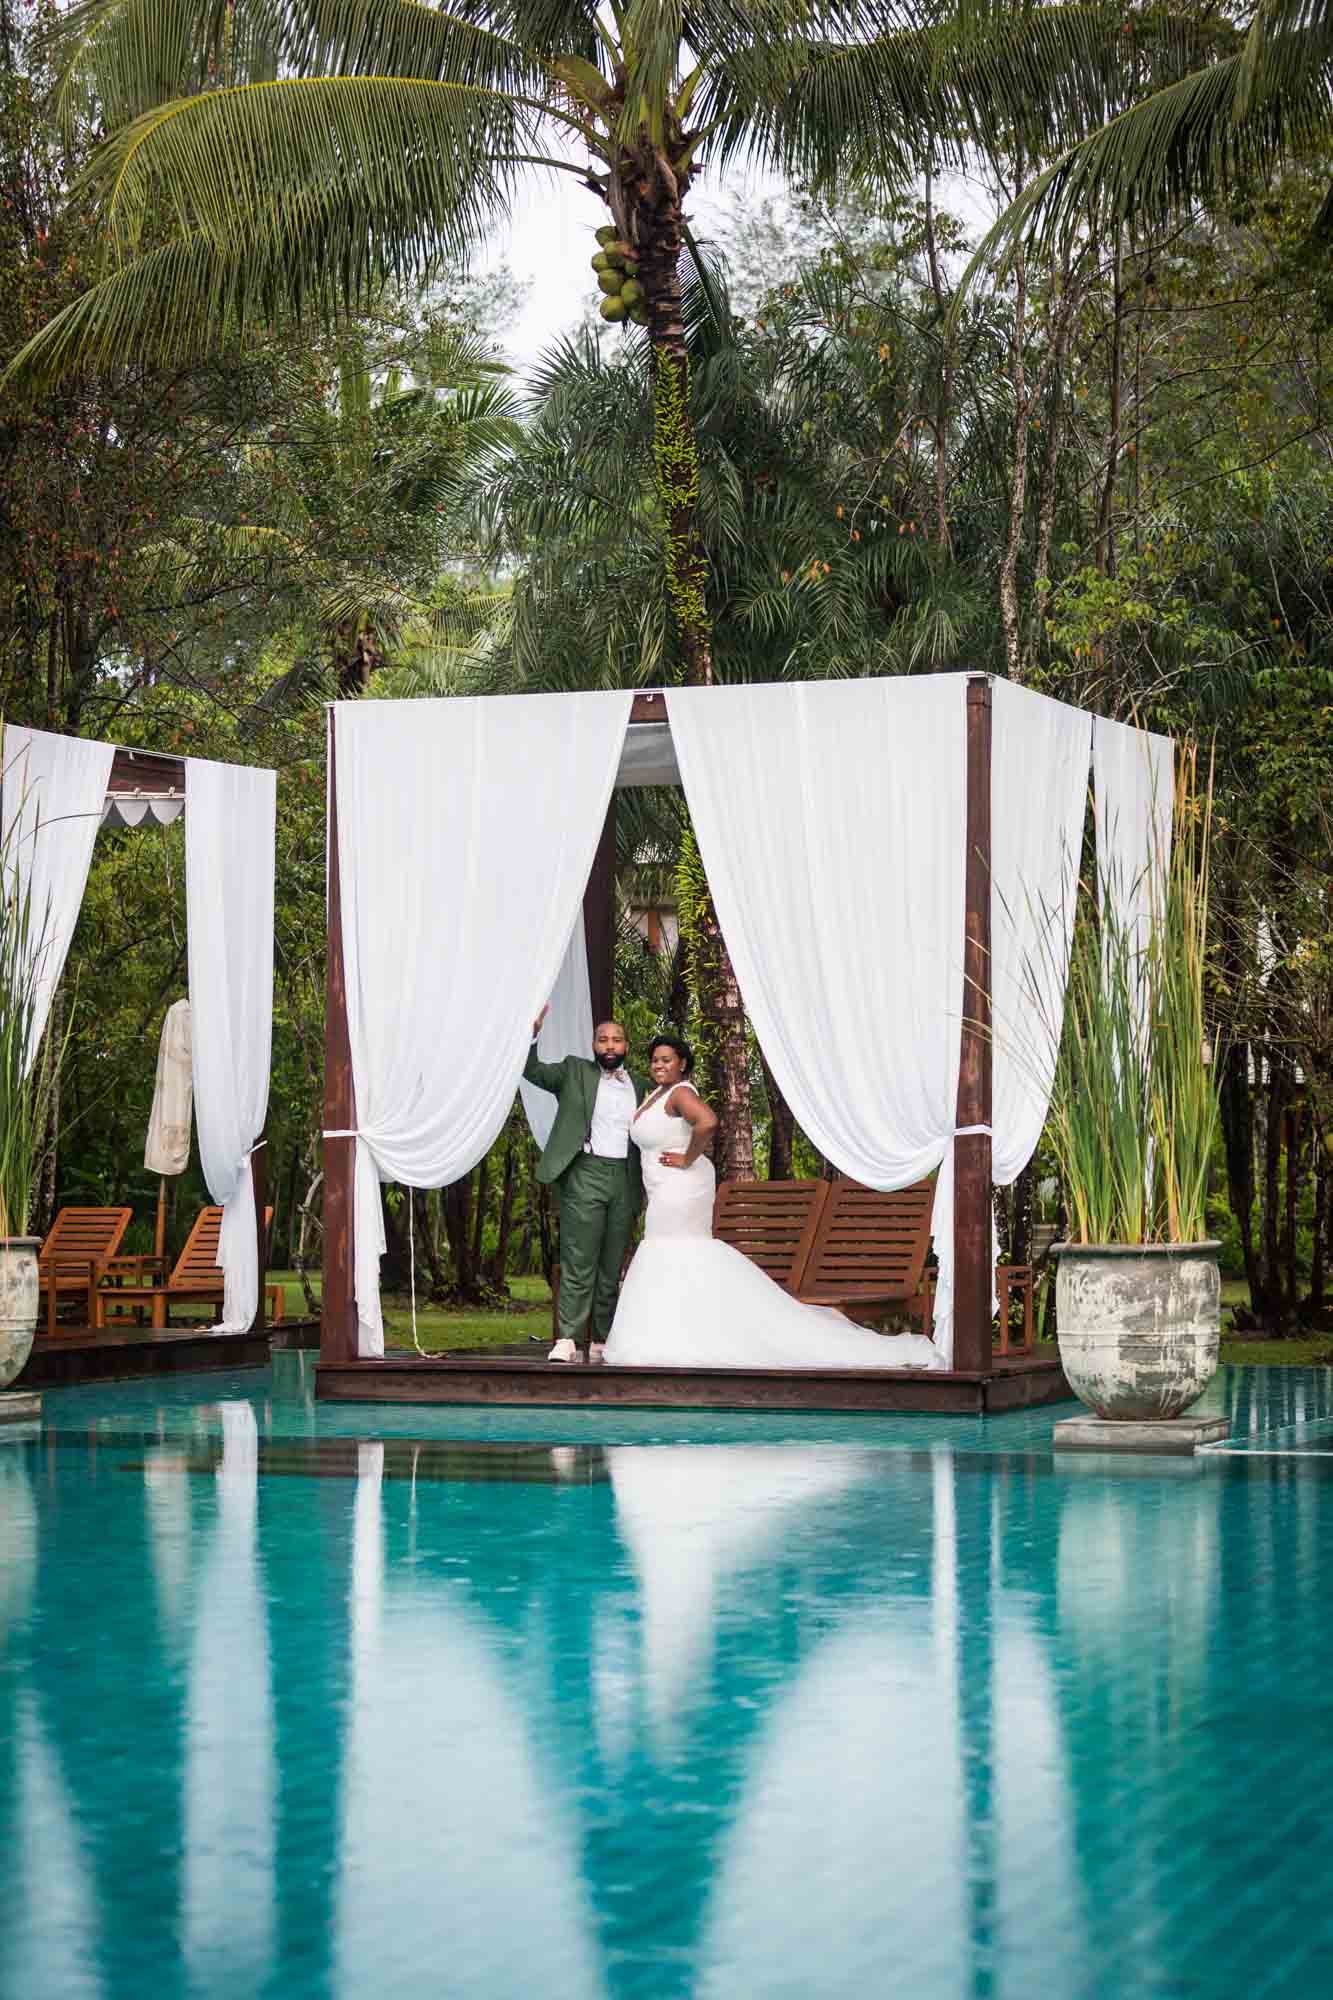 Bride and groom at a pool for an article on destination wedding photography tips